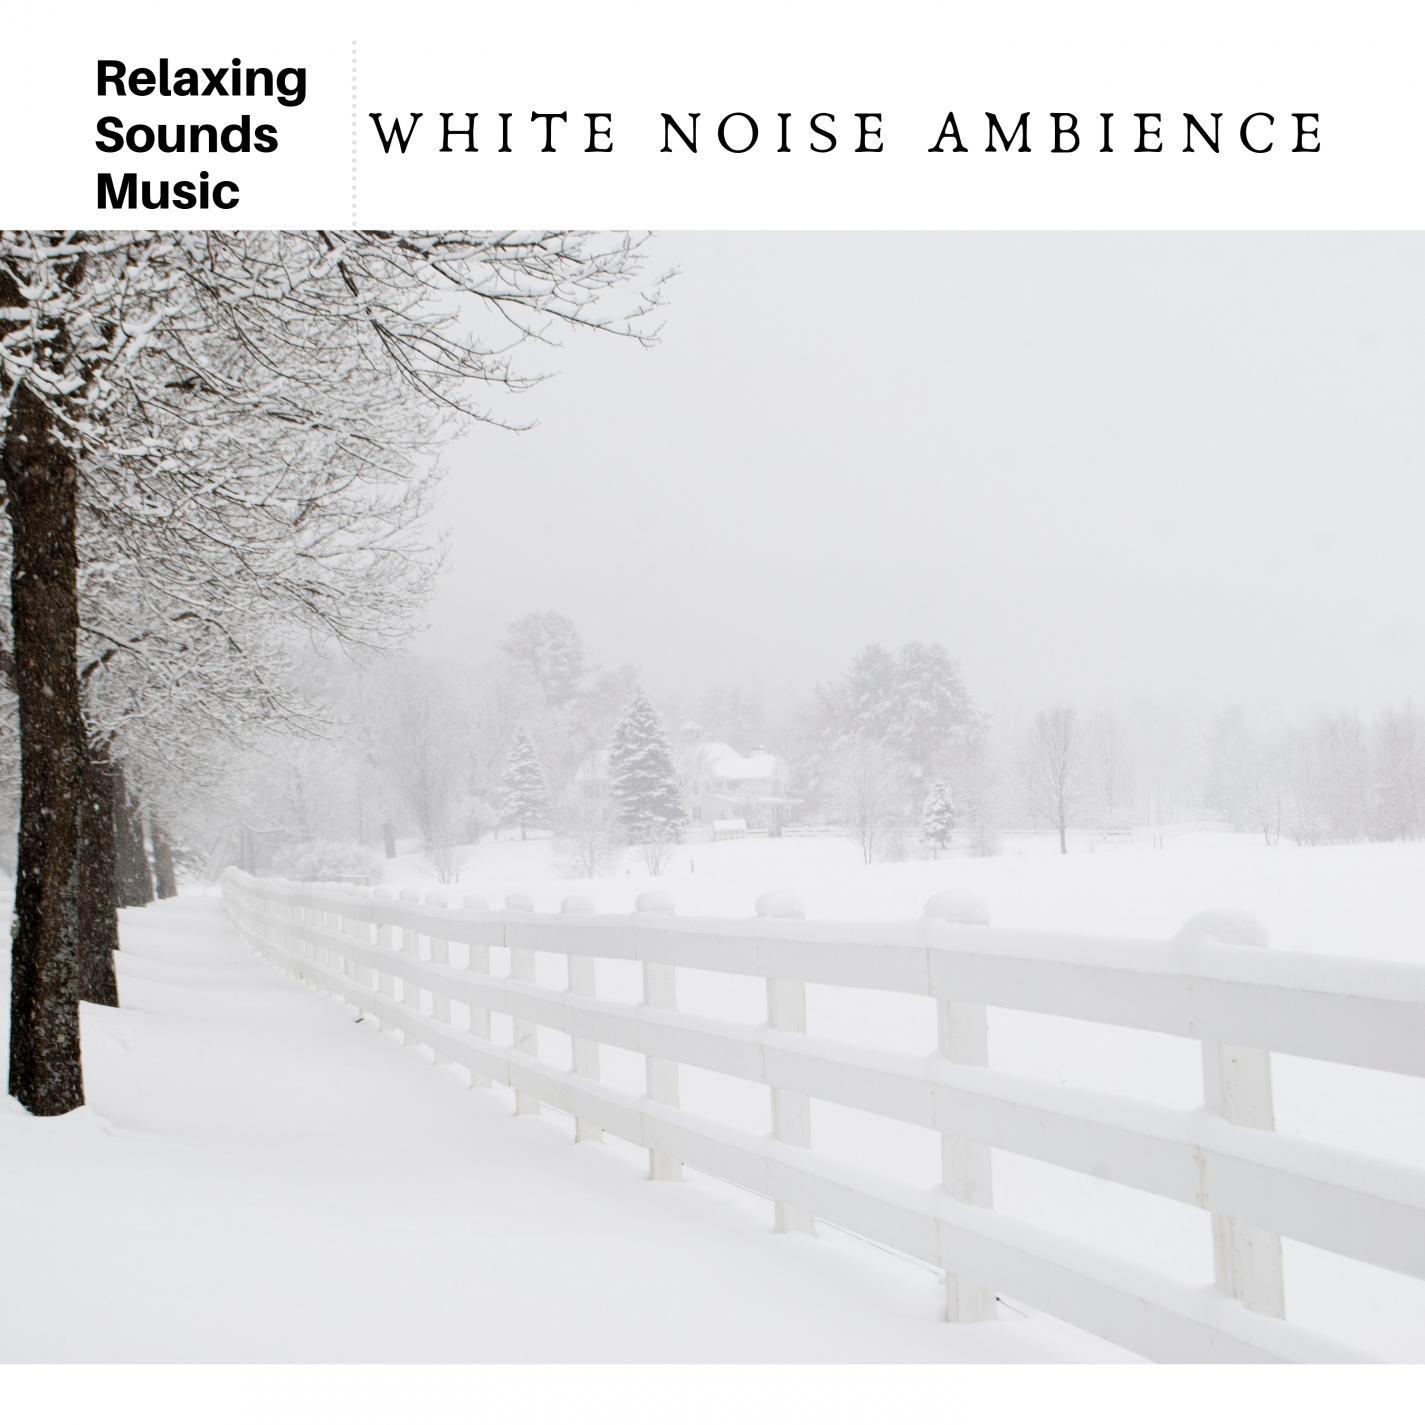 White Noise Ambience